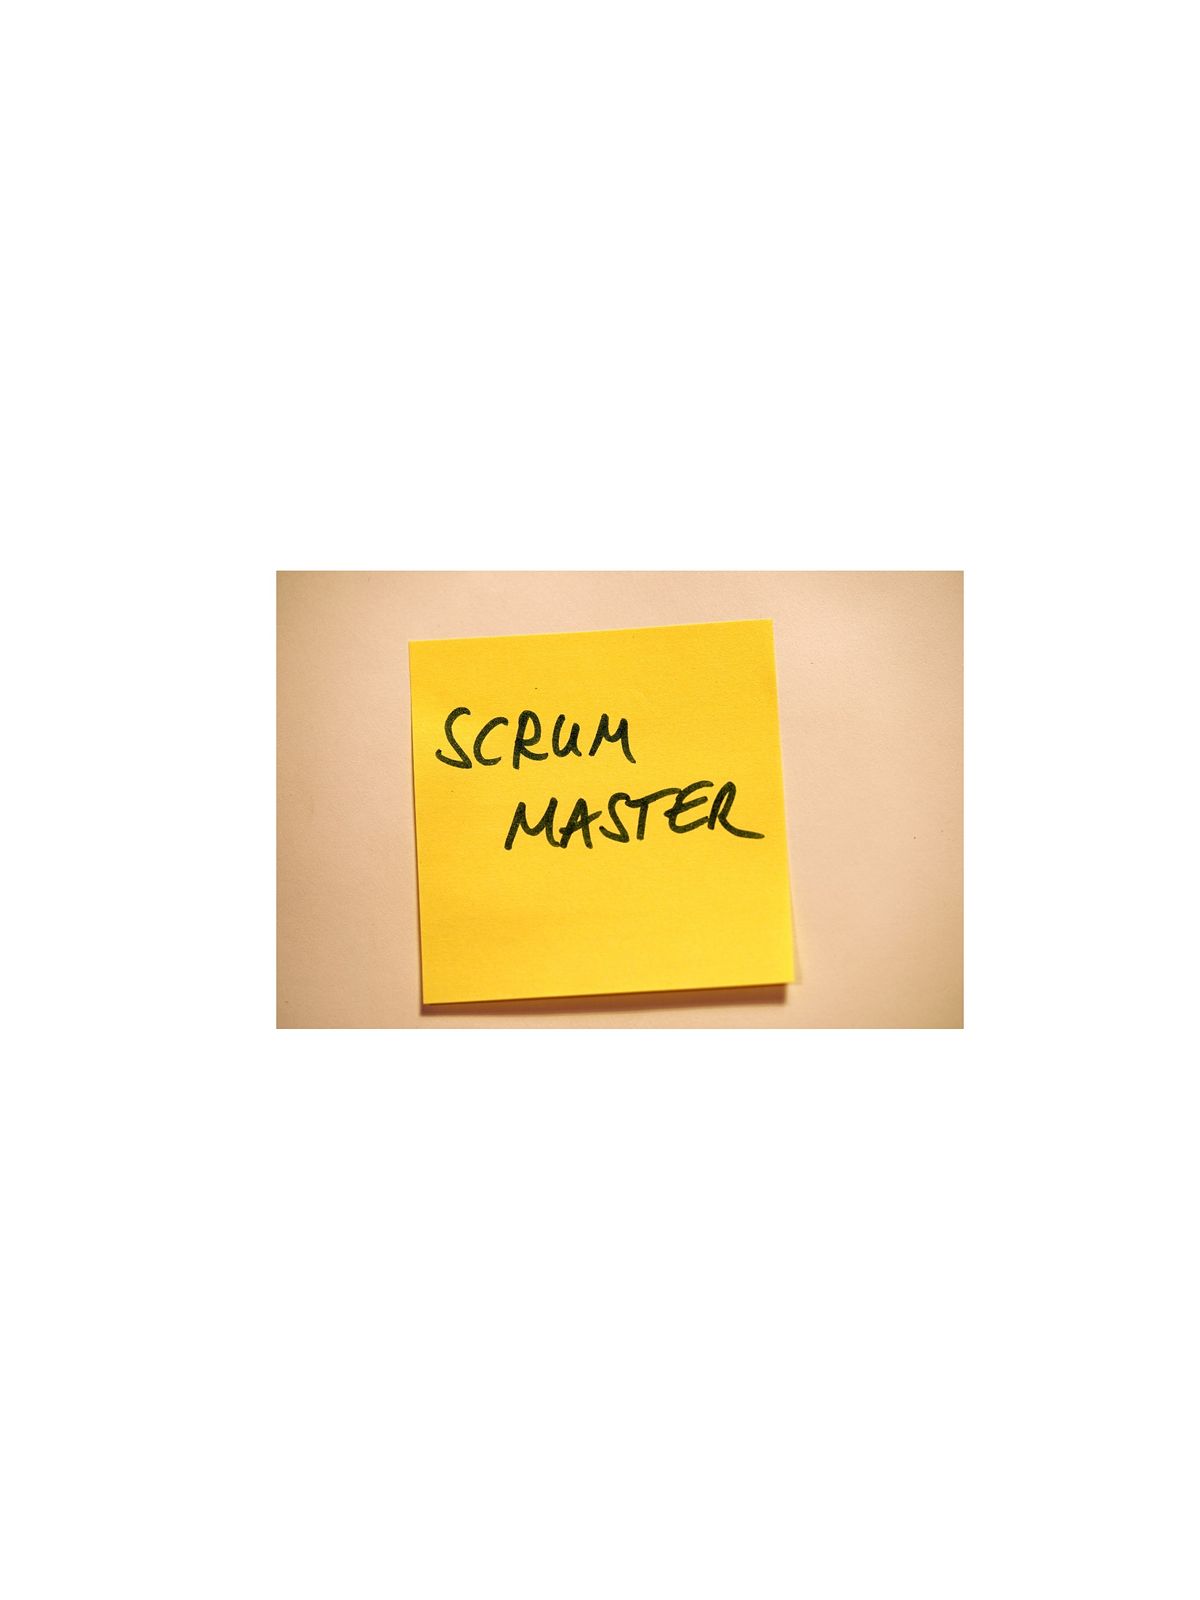 16 Hours Only Scrum Master Training Course in Allentown